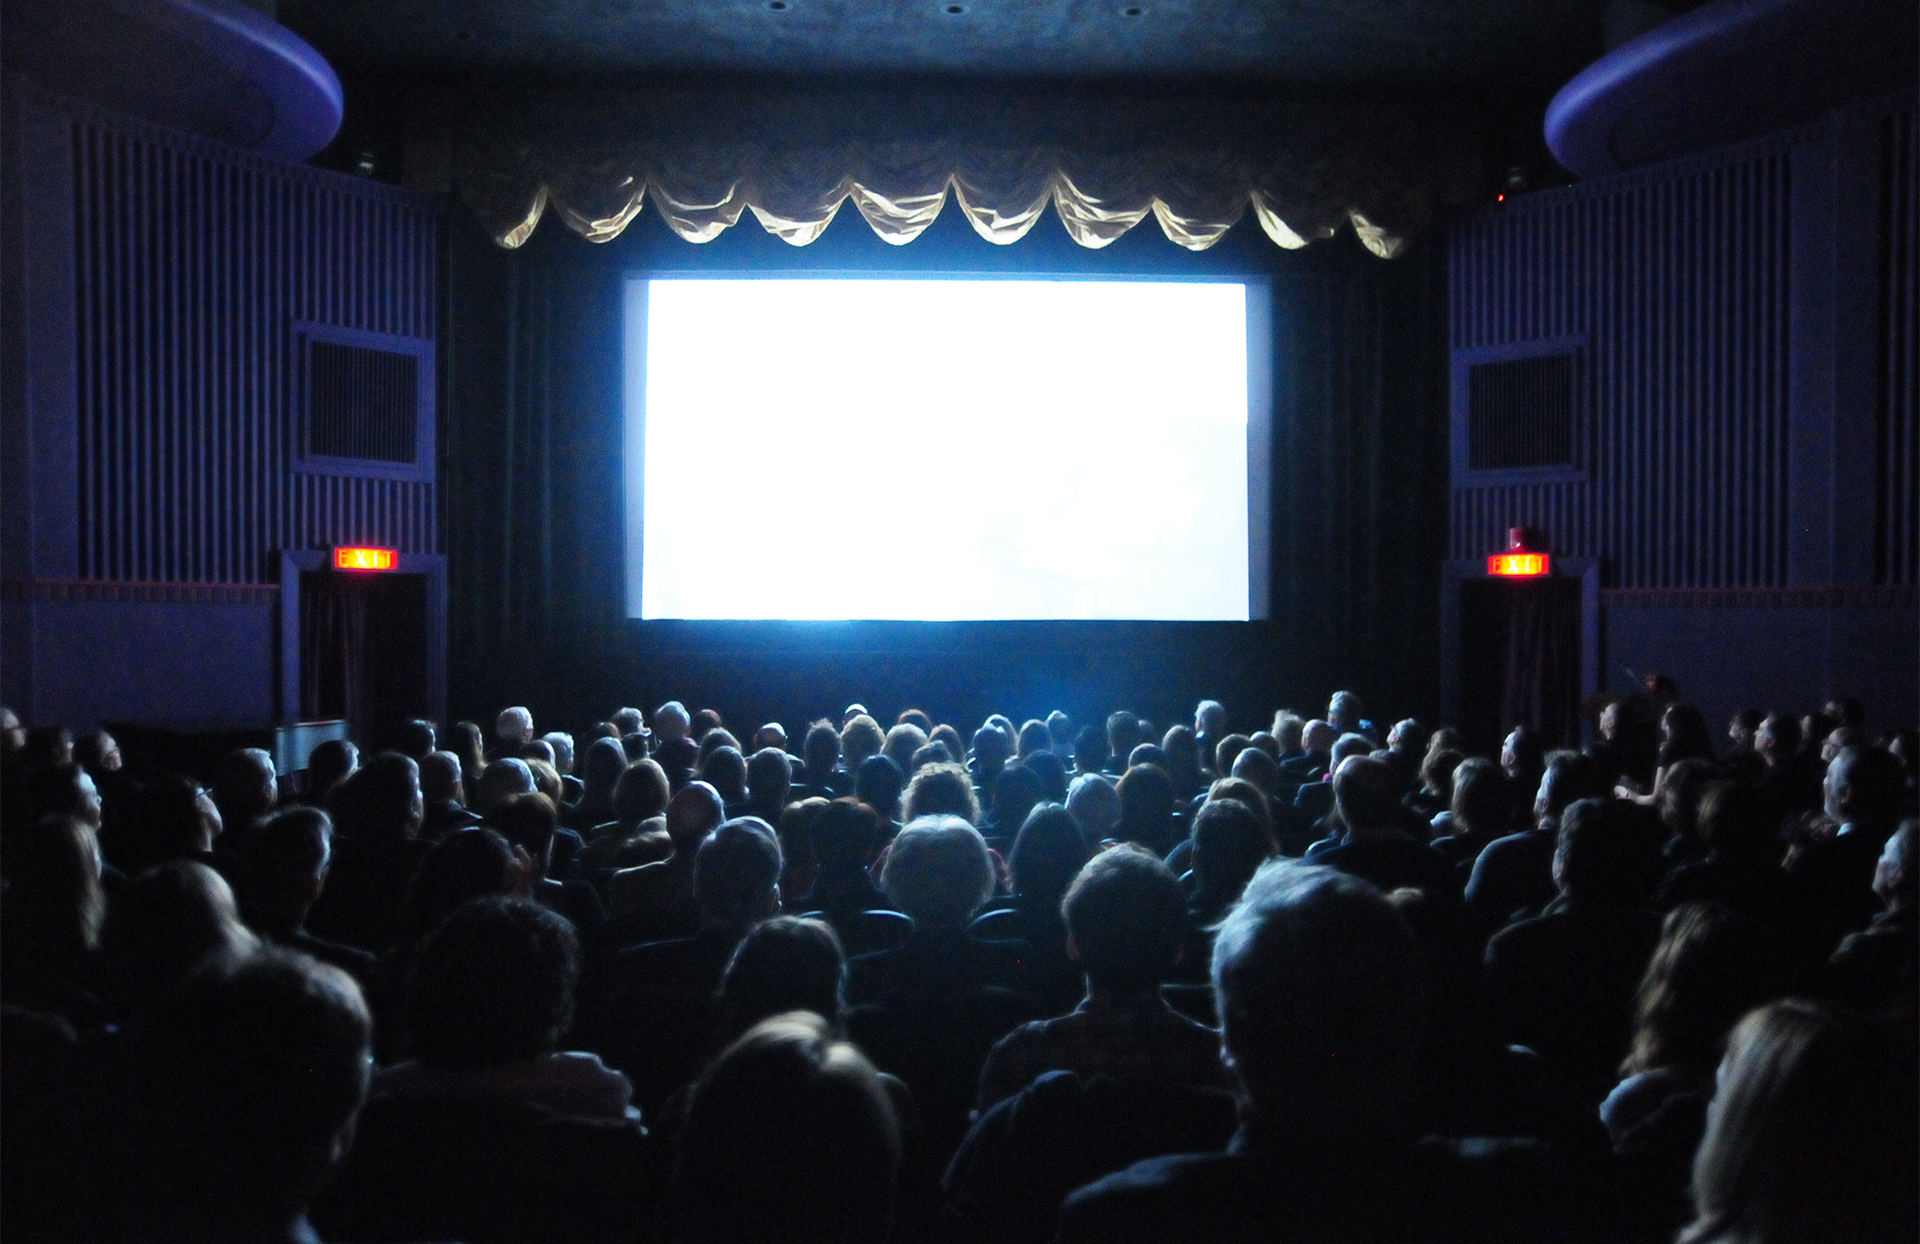 Movie theater with full audience and blank screen glowing in the dark